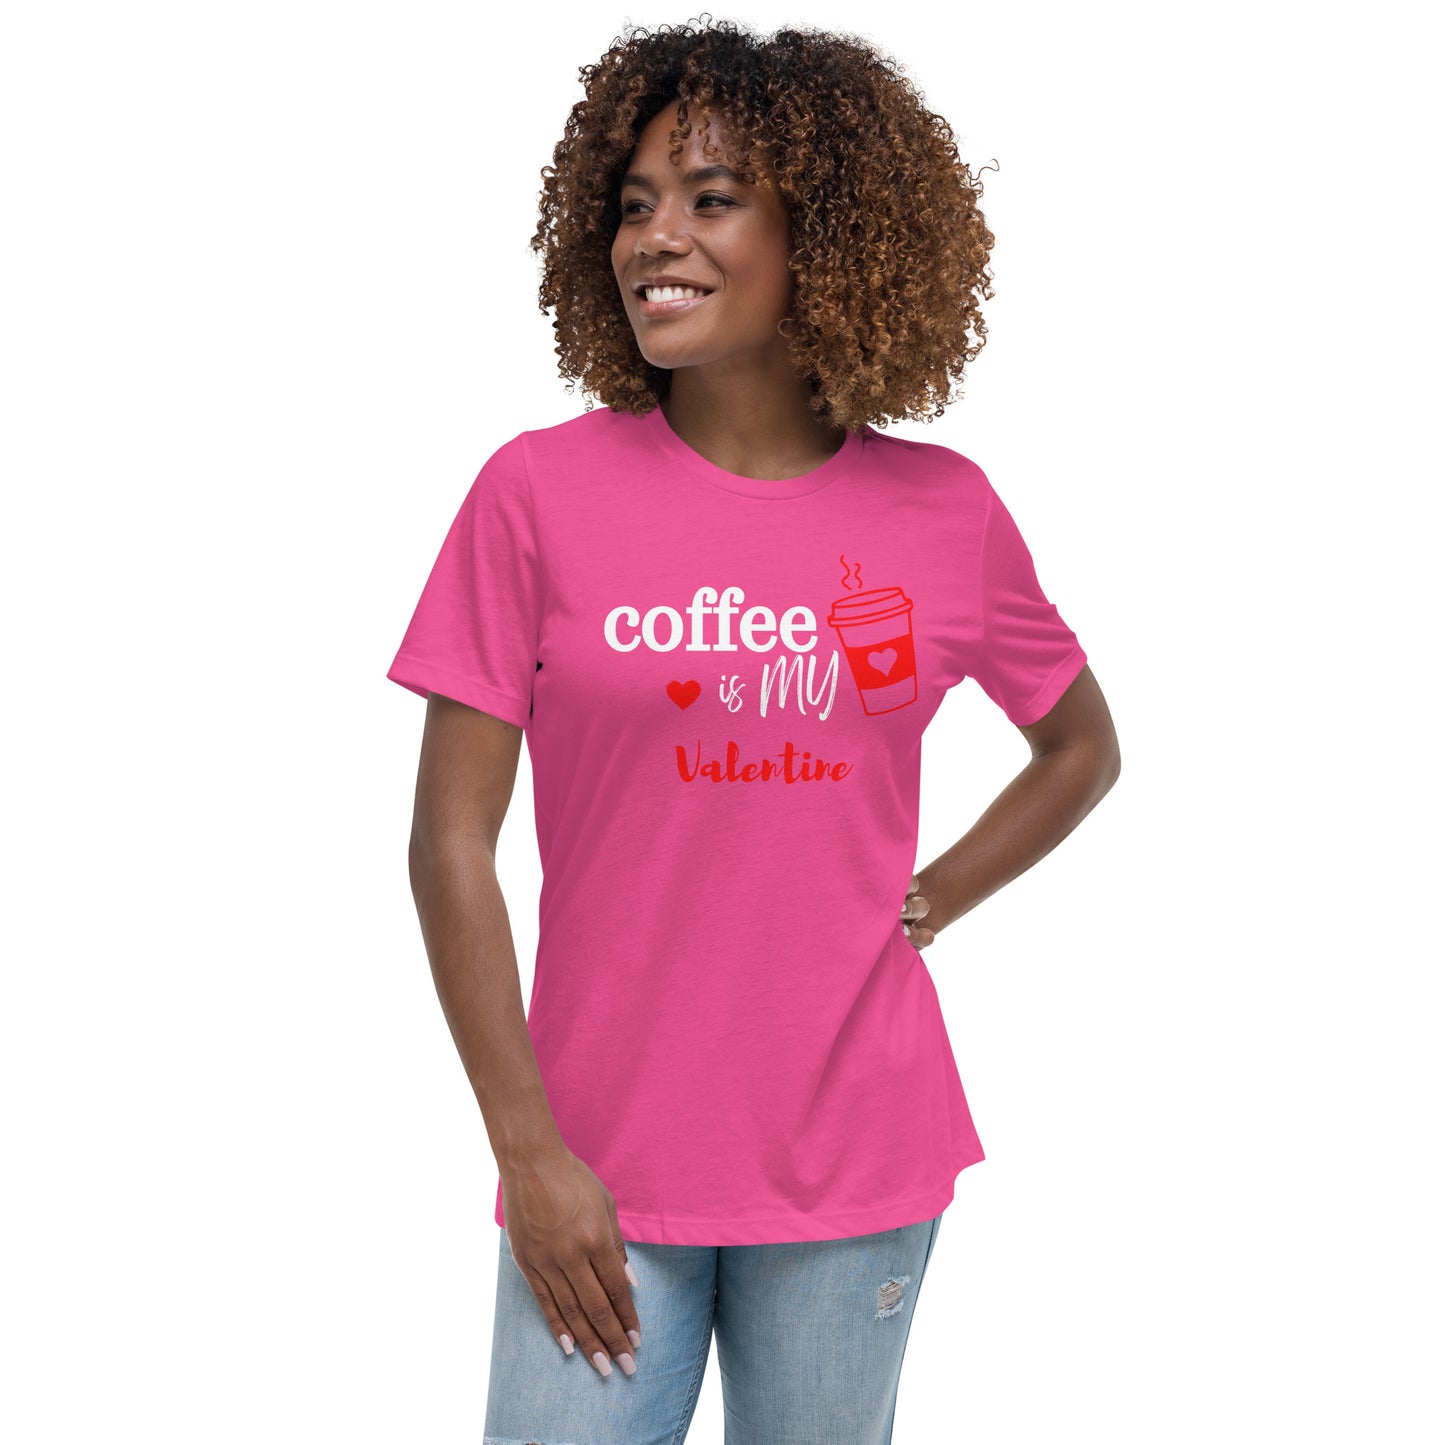 Coffee is my Valentine - Women's Relaxed T-Shirt (Bella + Canvas)